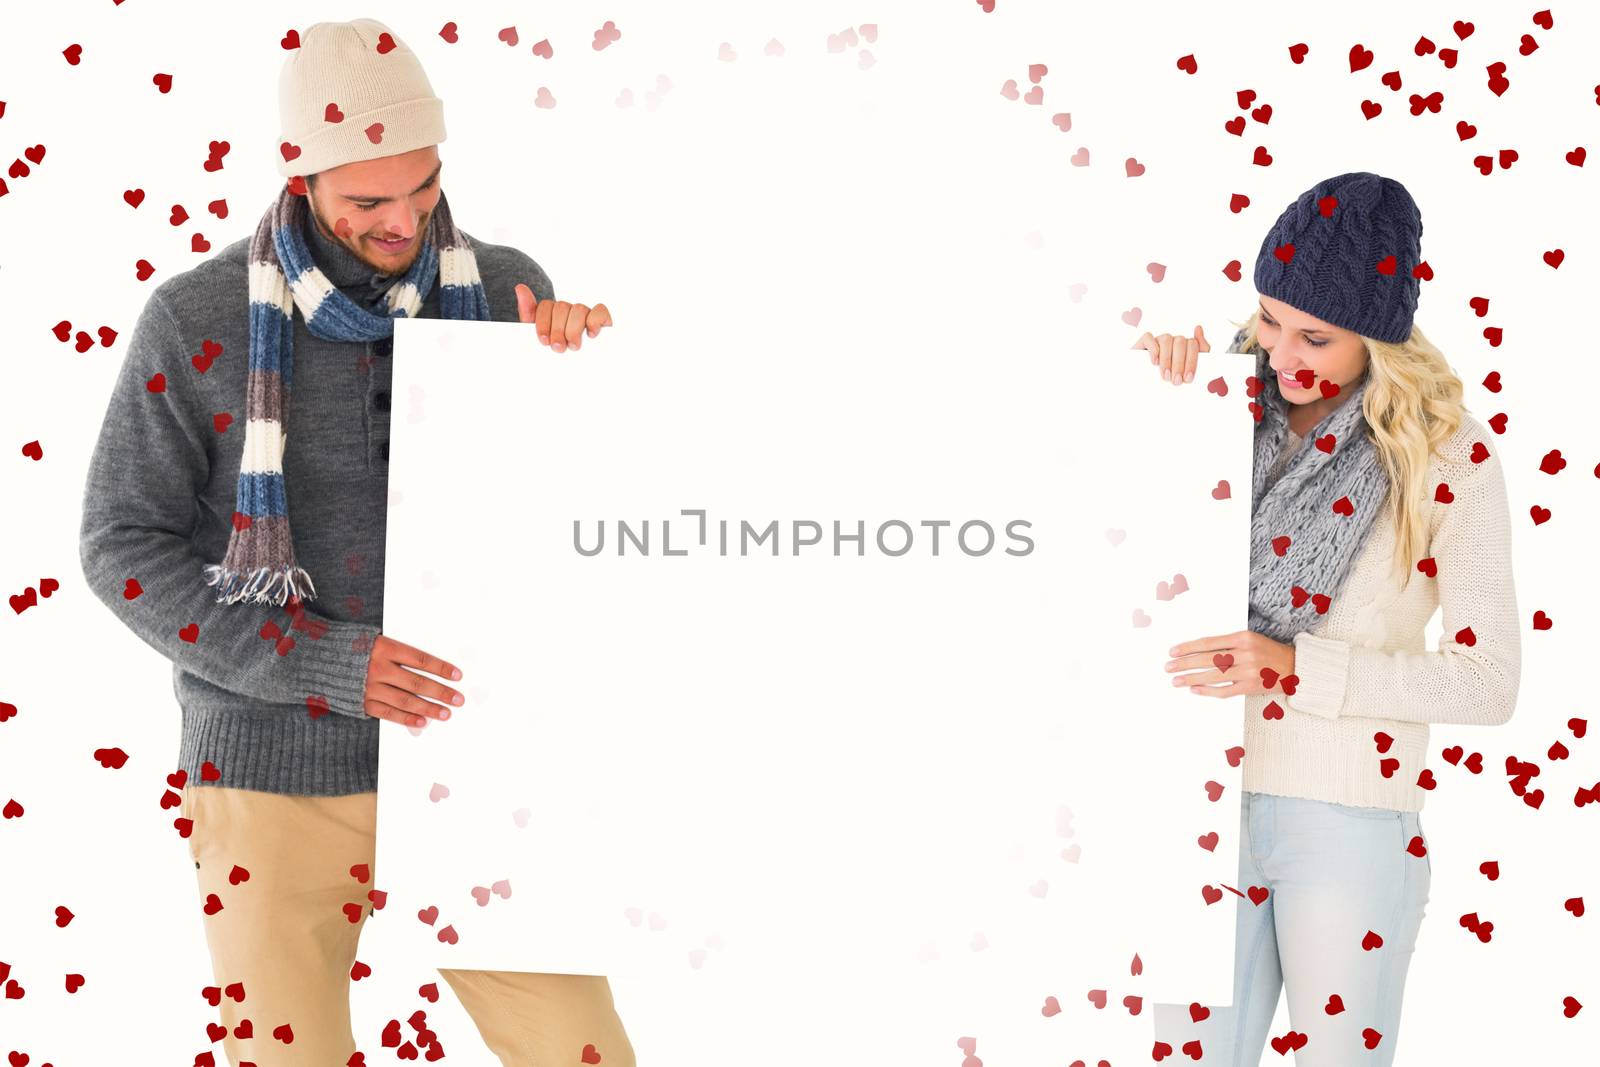 Attractive couple in winter fashion showing poster against red love hearts